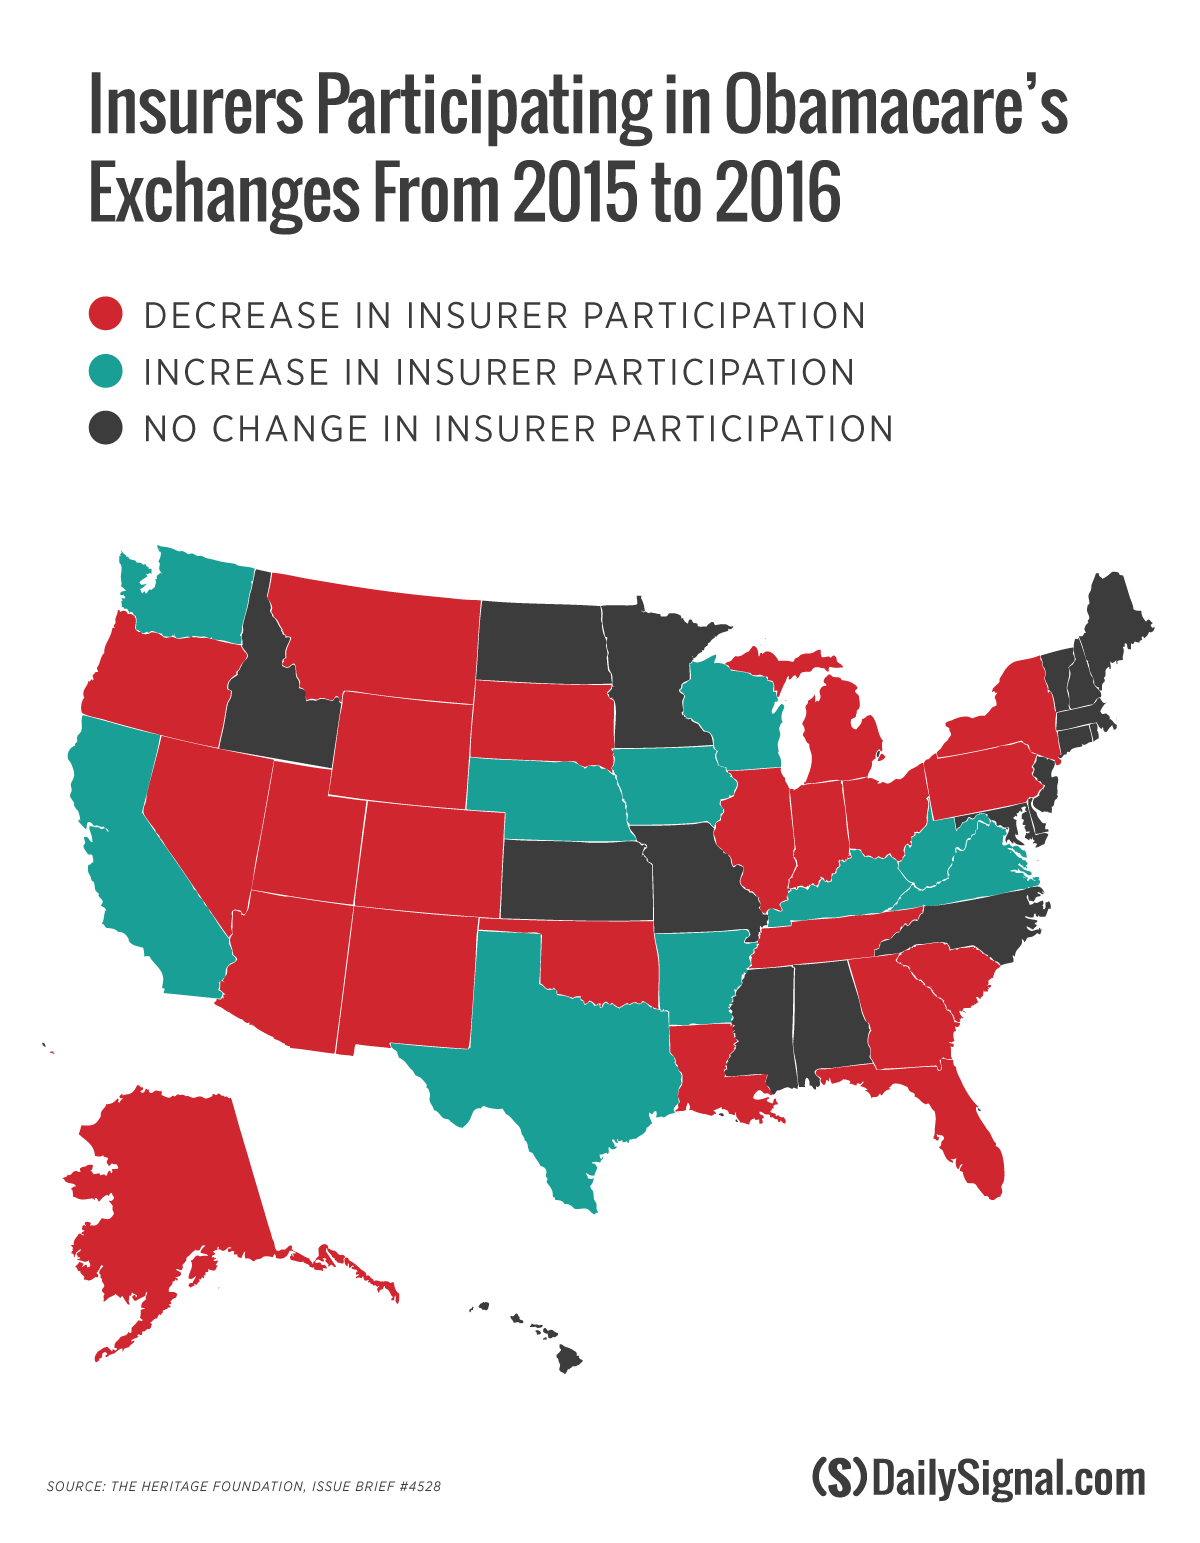 Insurers Participating in Obamacare Exchanges from 2015 to 2016